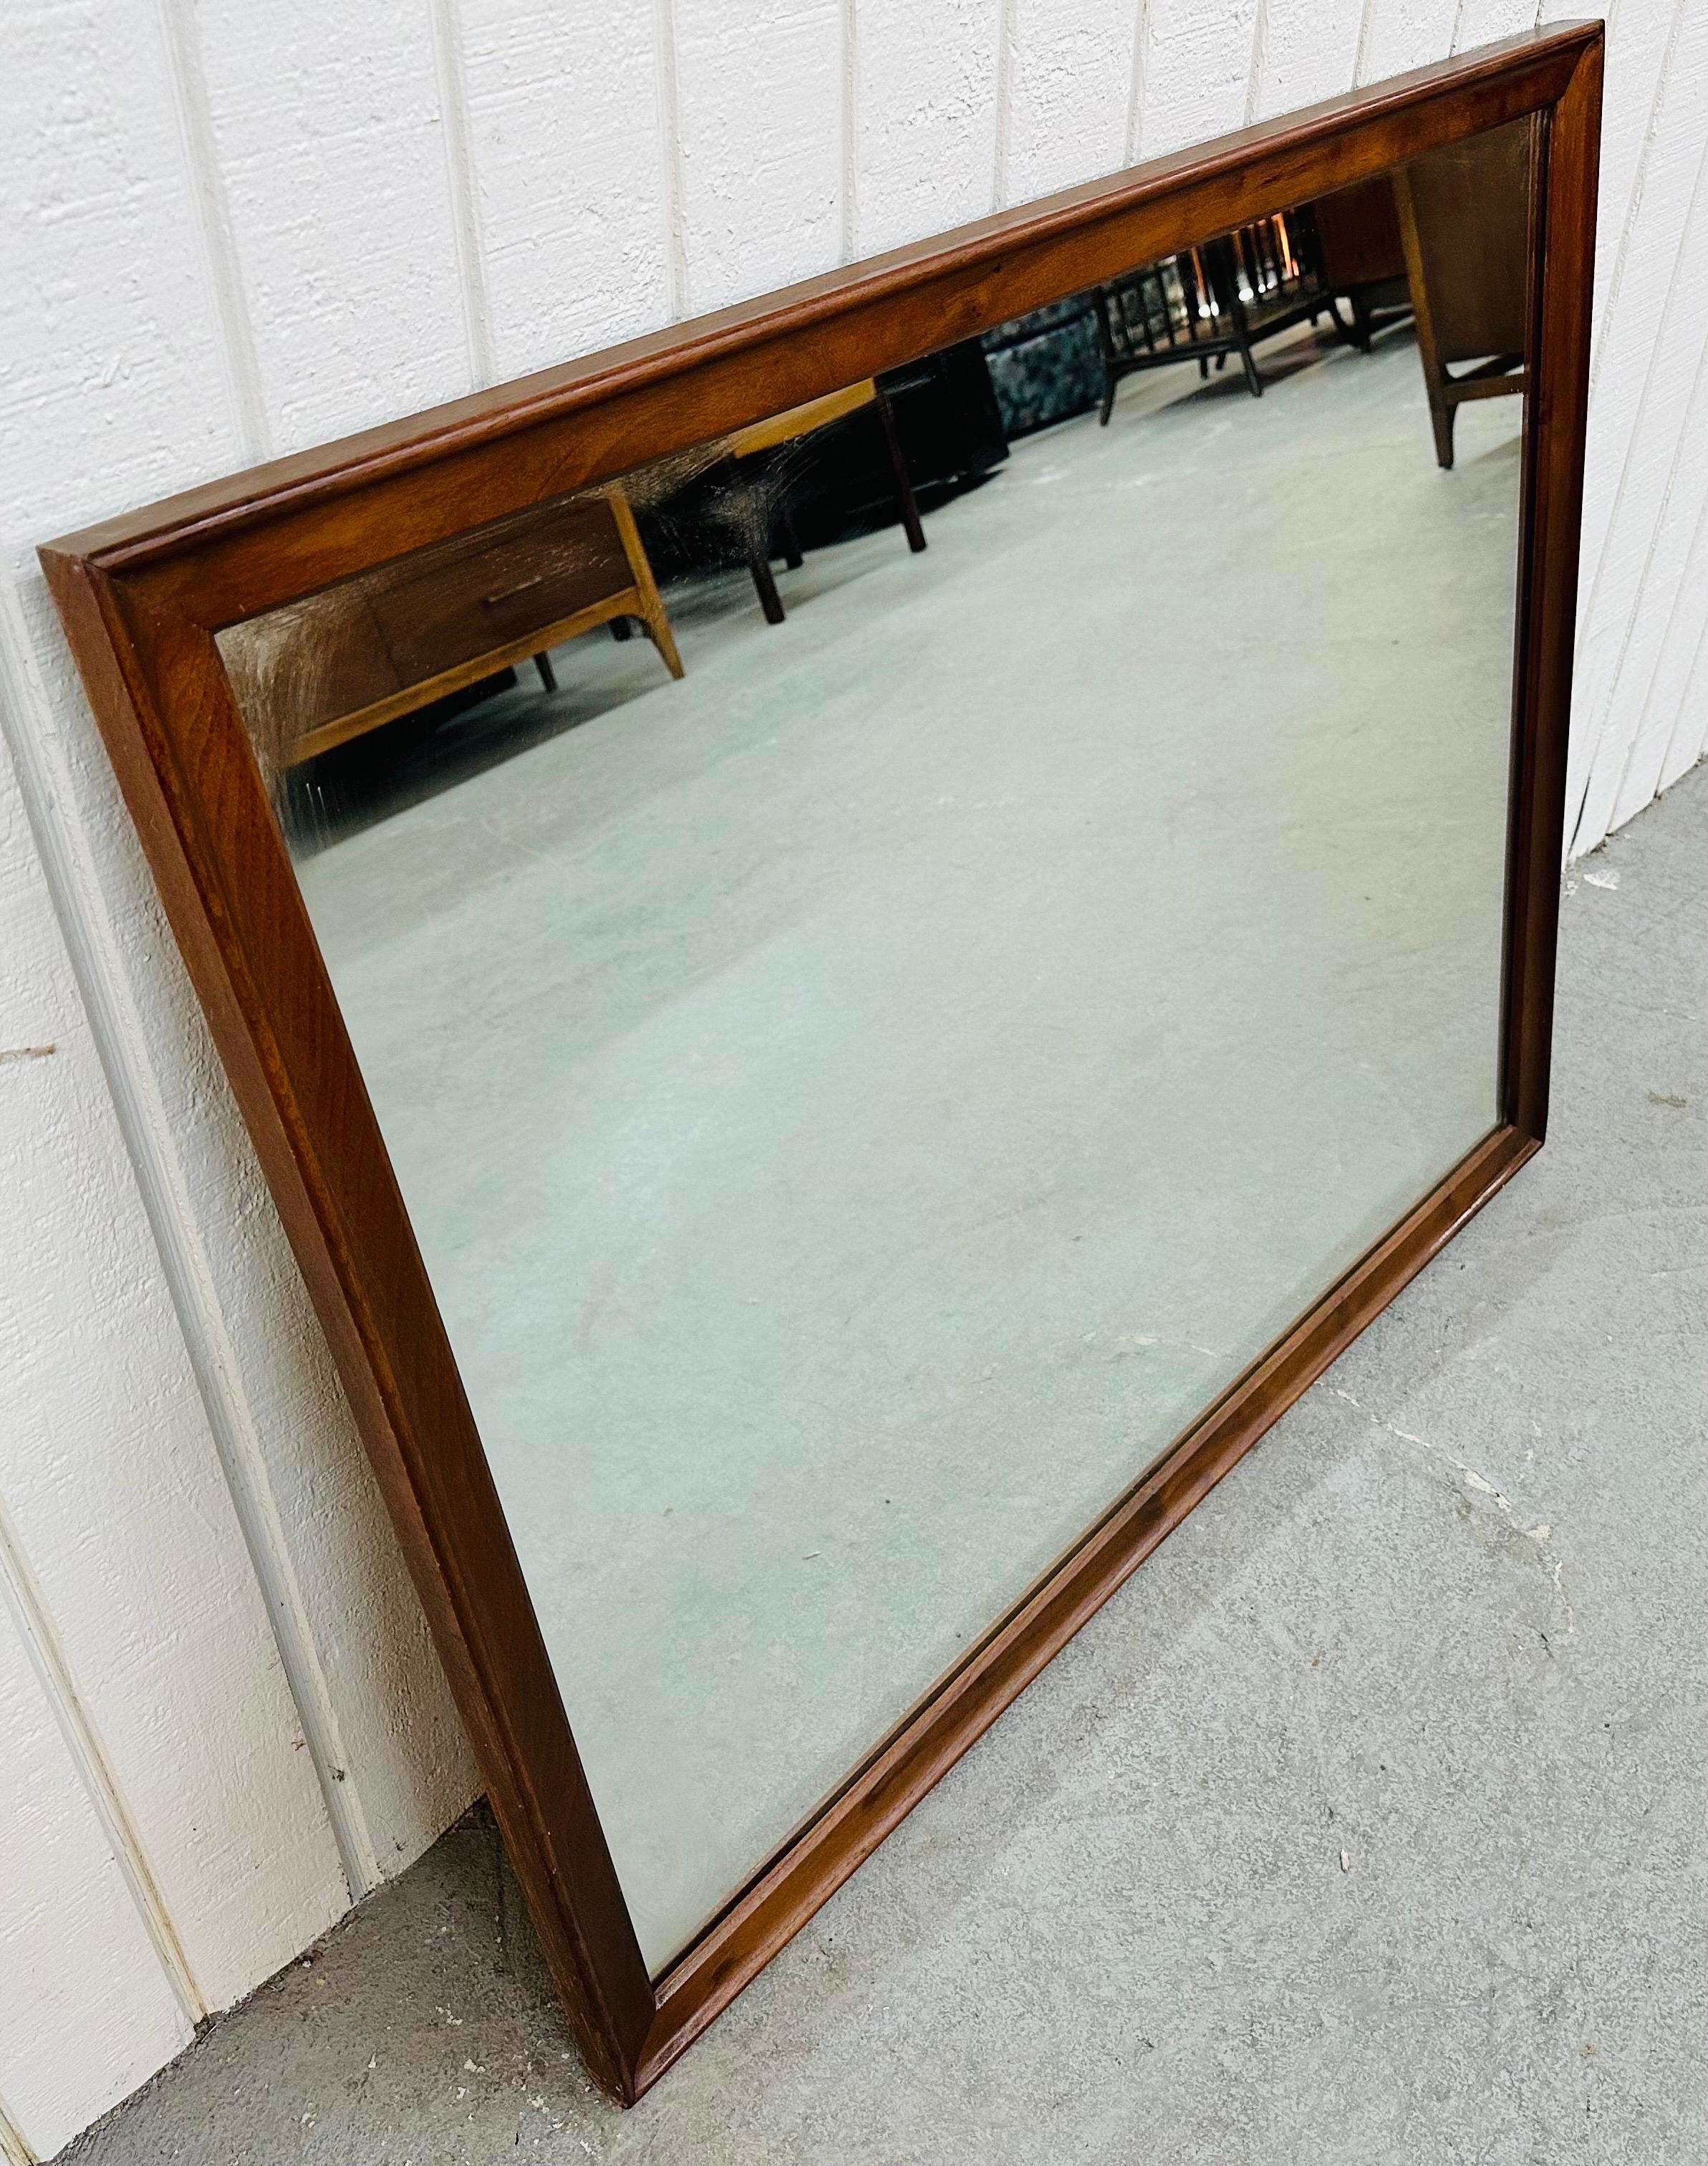 This listing is for a Mid-Century Modern Drexel Declaration Walnut Wall Mirror. Featuring a straight line rectangular design, solid wood frame, and a beautiful walnut finish. This is an exceptional combination of quality and design by Drexel!